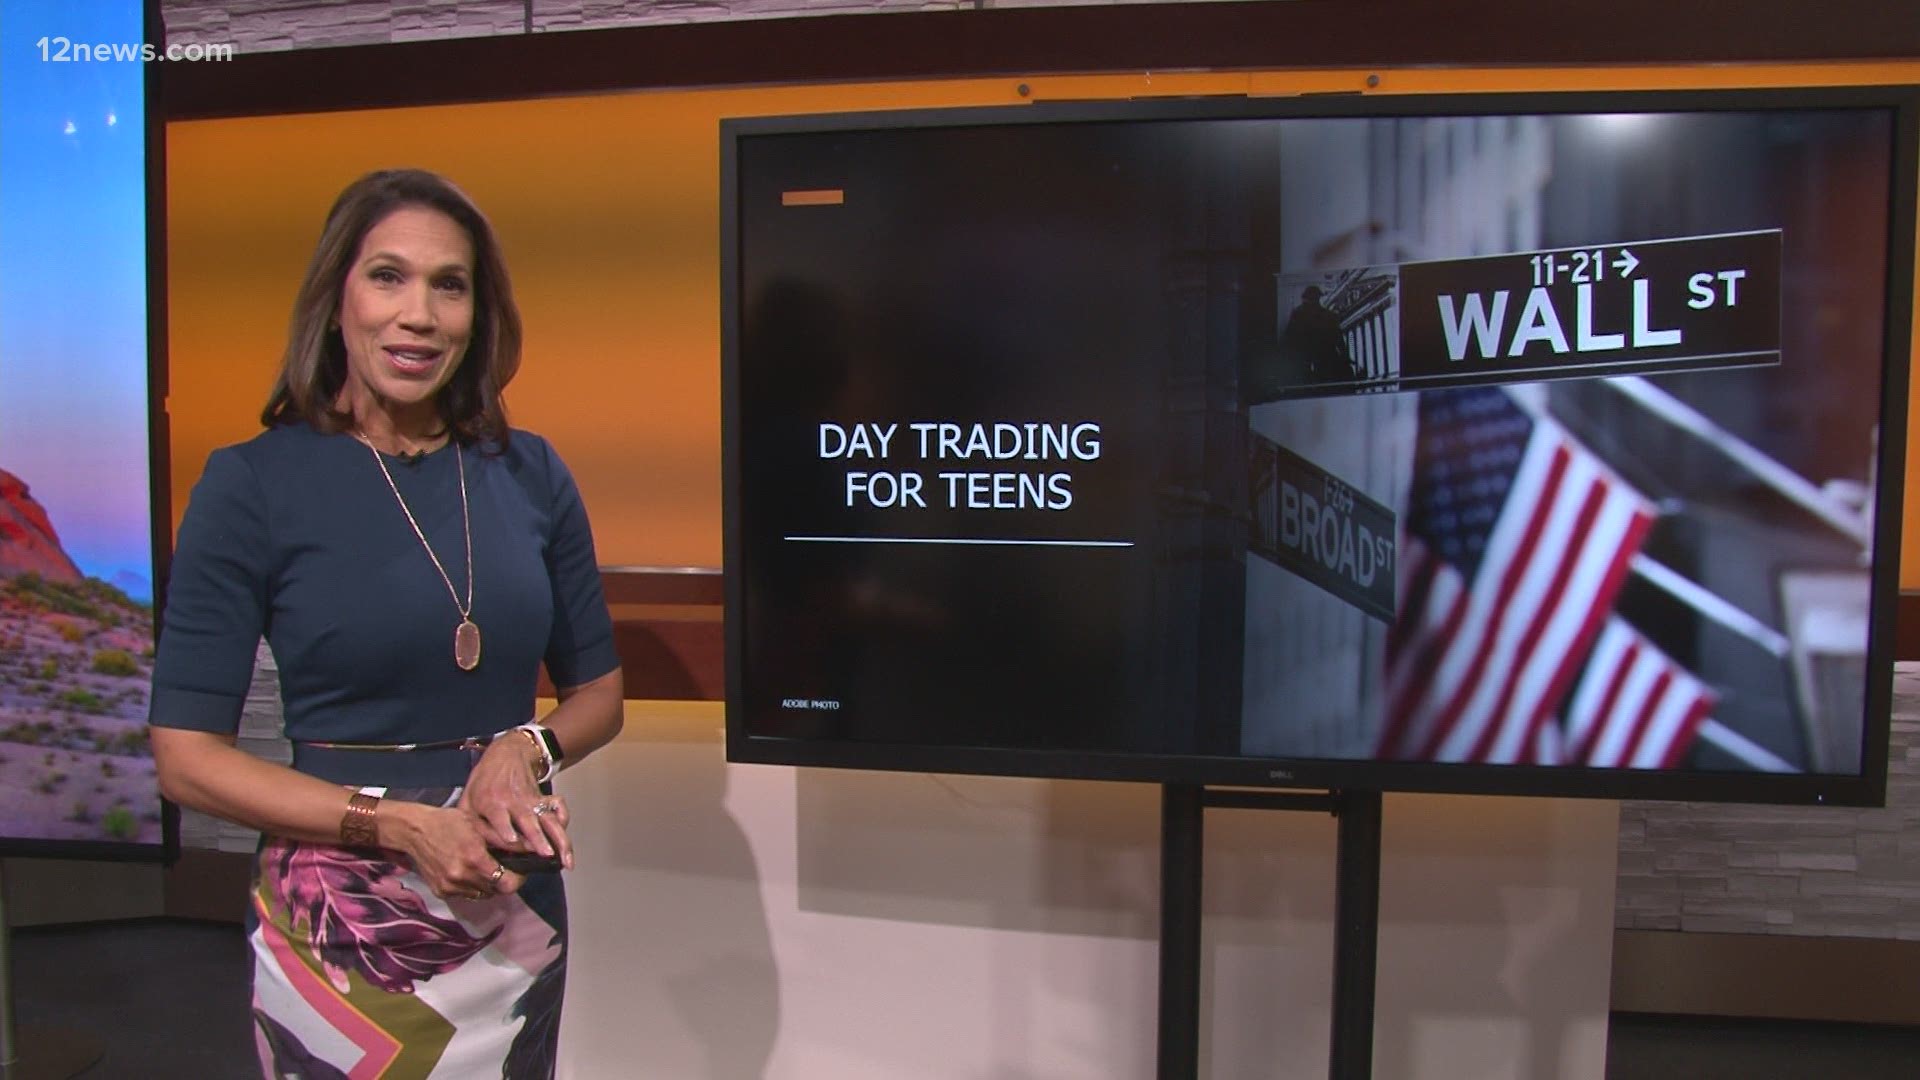 Fidelity is planning to allow teens to trade stocks for free. Rachel McNeill explains.